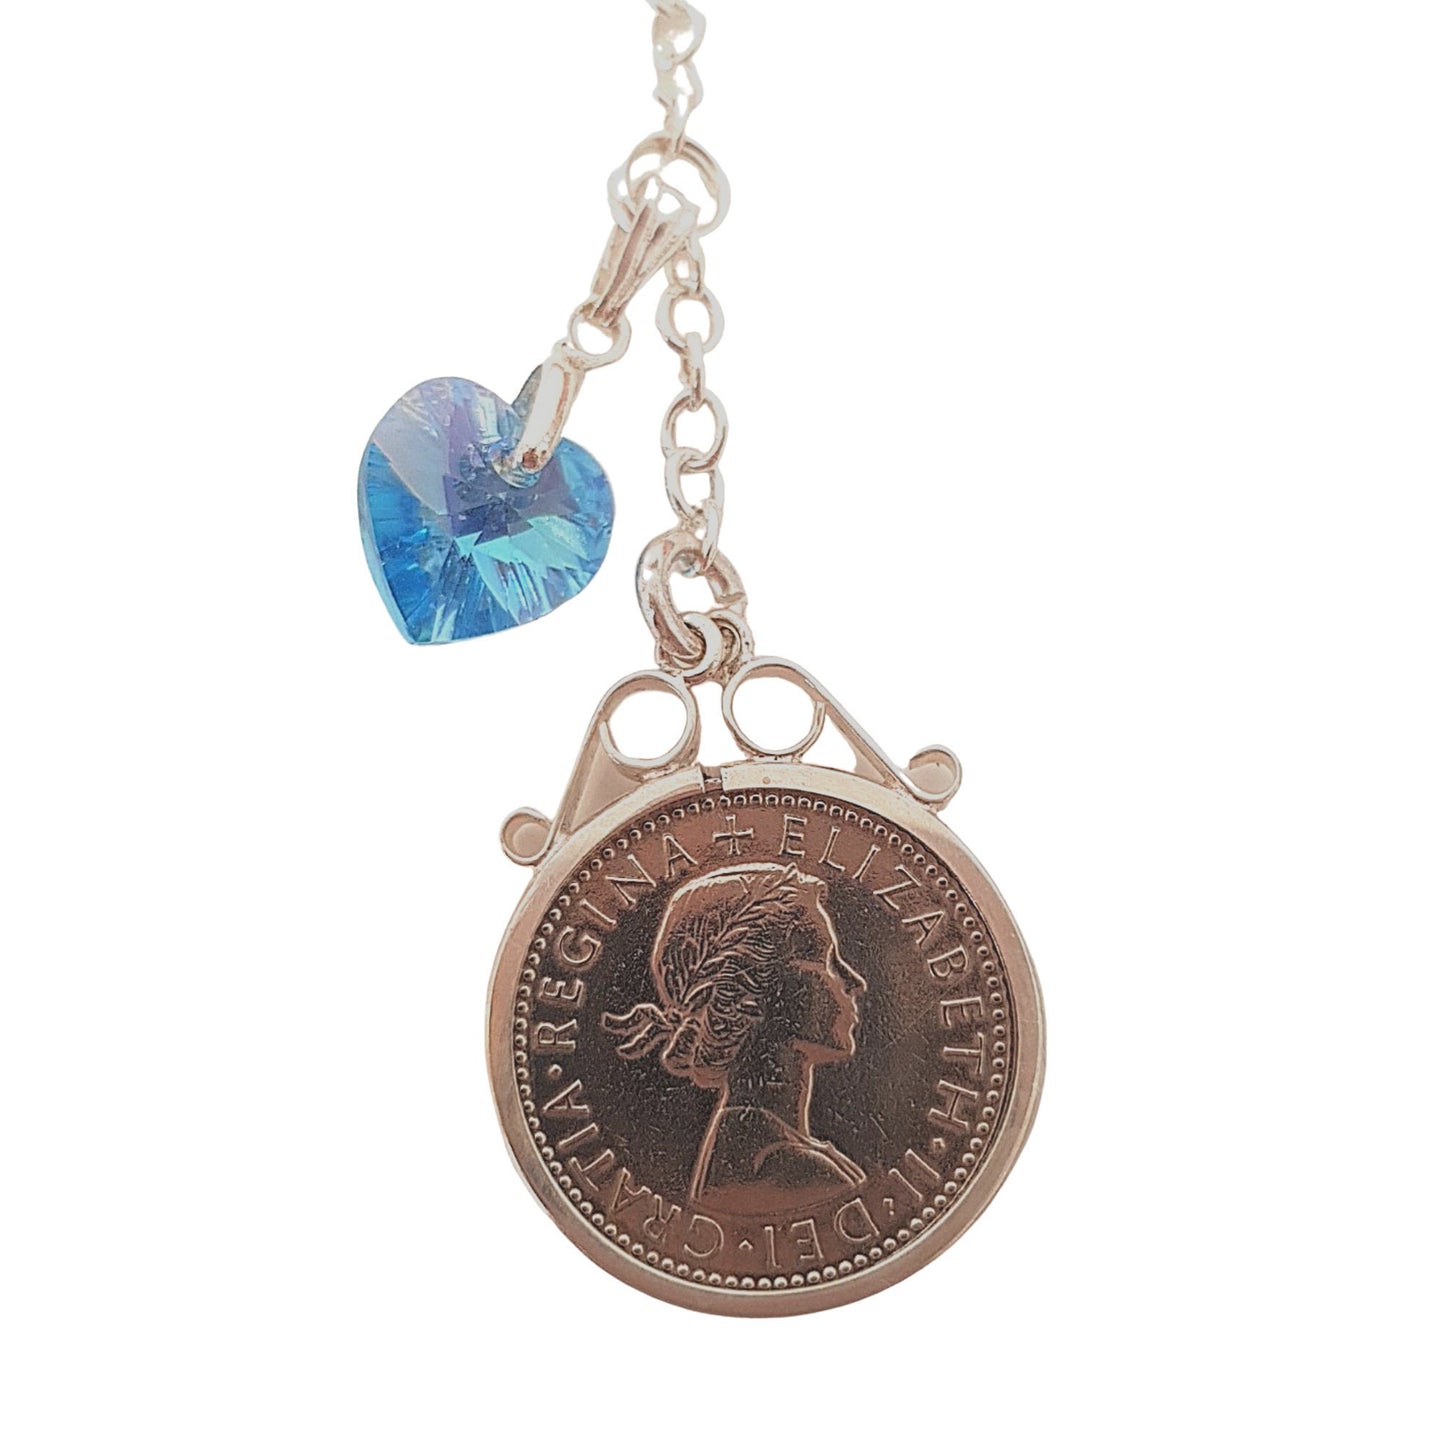 Real British sixpence with blue crystal heart wedding bouquet charm